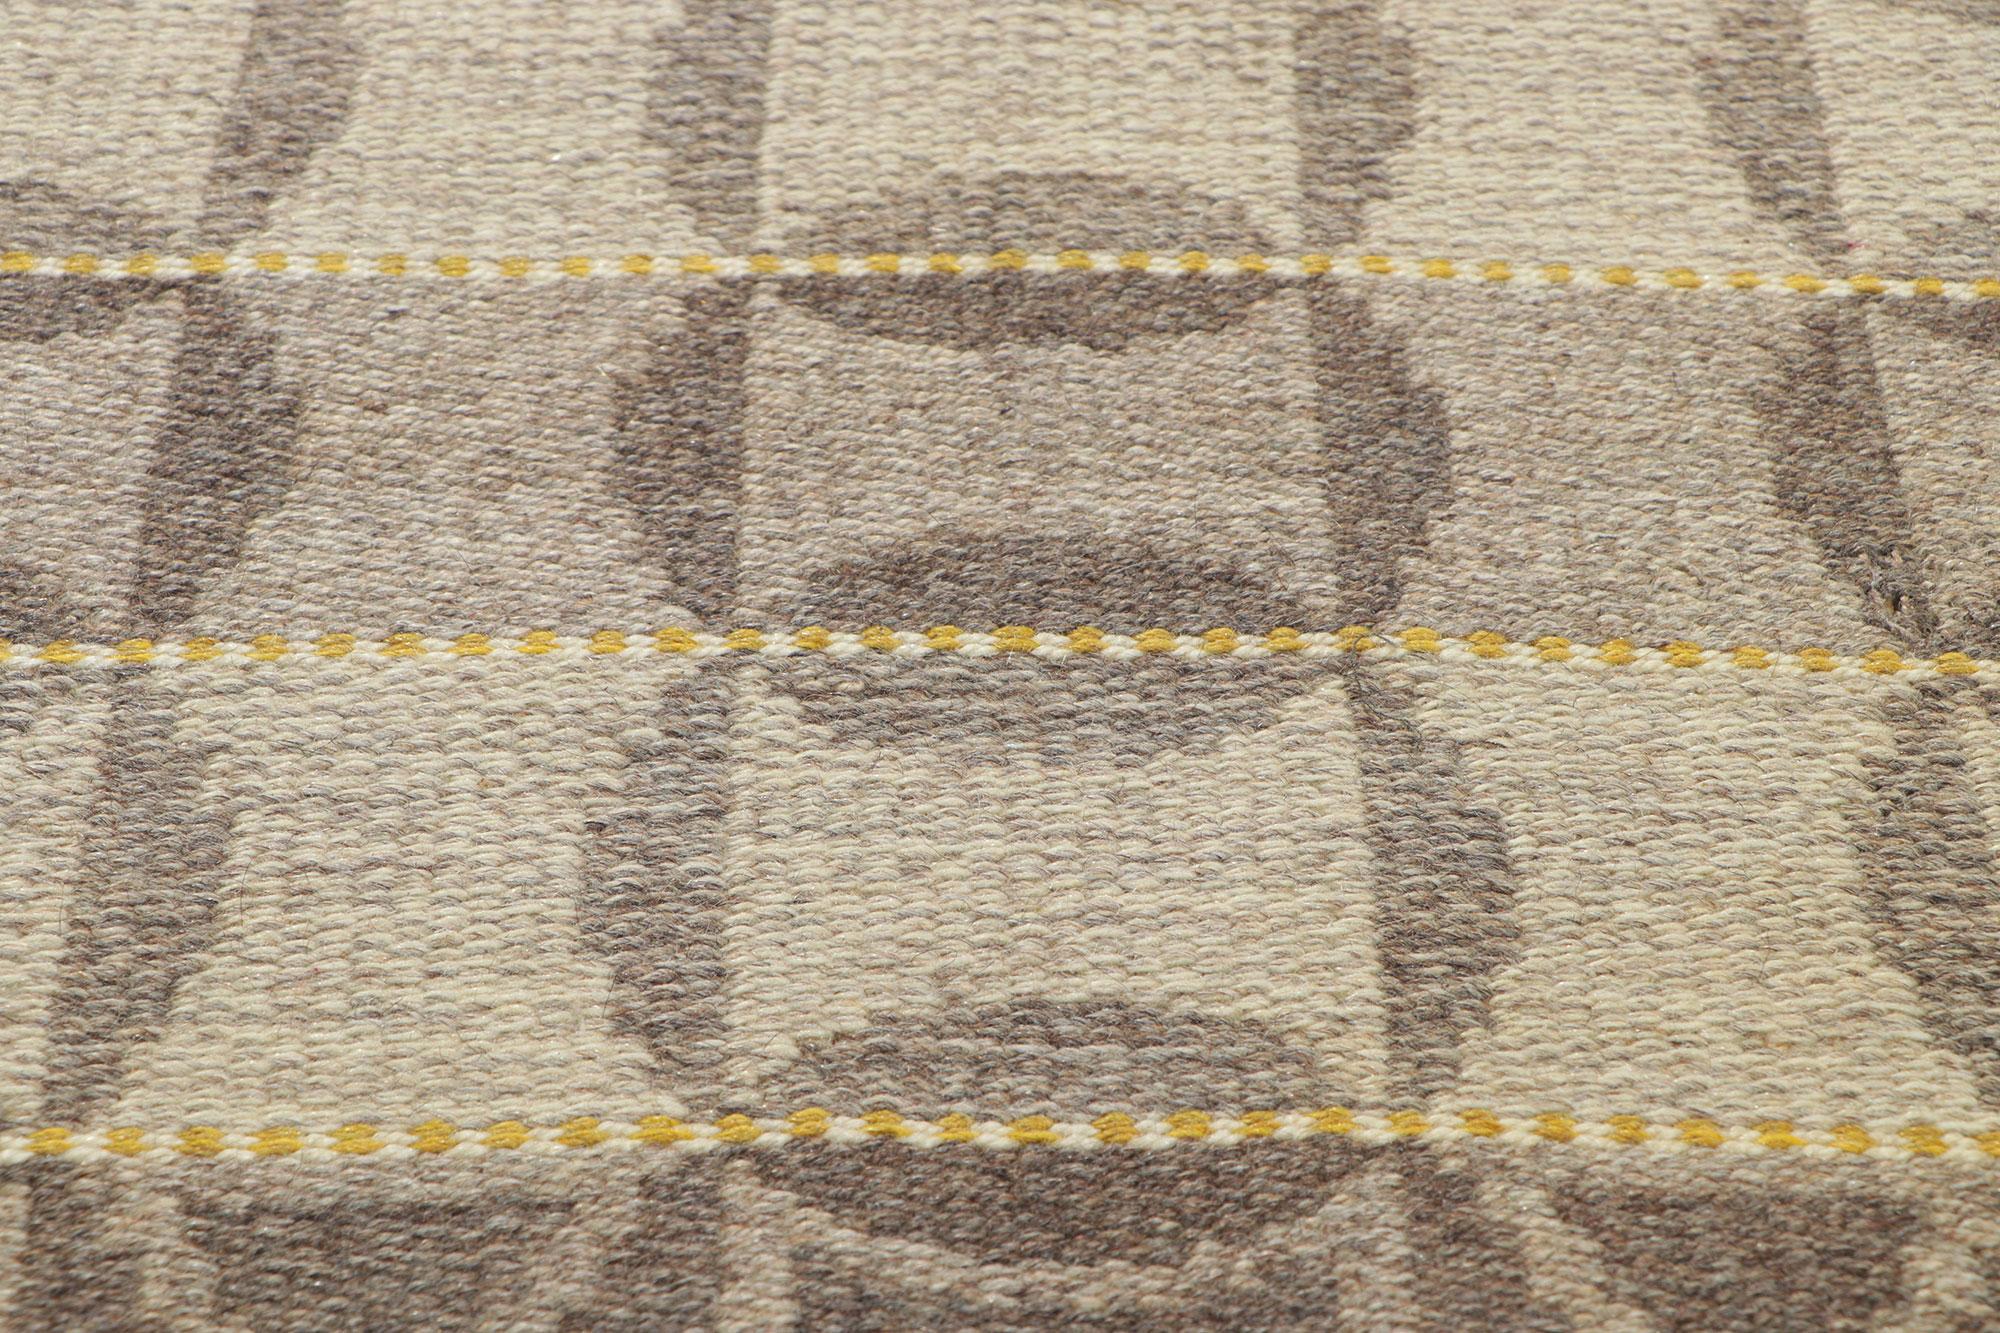 Earth-Tone Vintage Swedish Kilim Rollakan Rug with Dagaz Rune Nordic Style In Good Condition For Sale In Dallas, TX